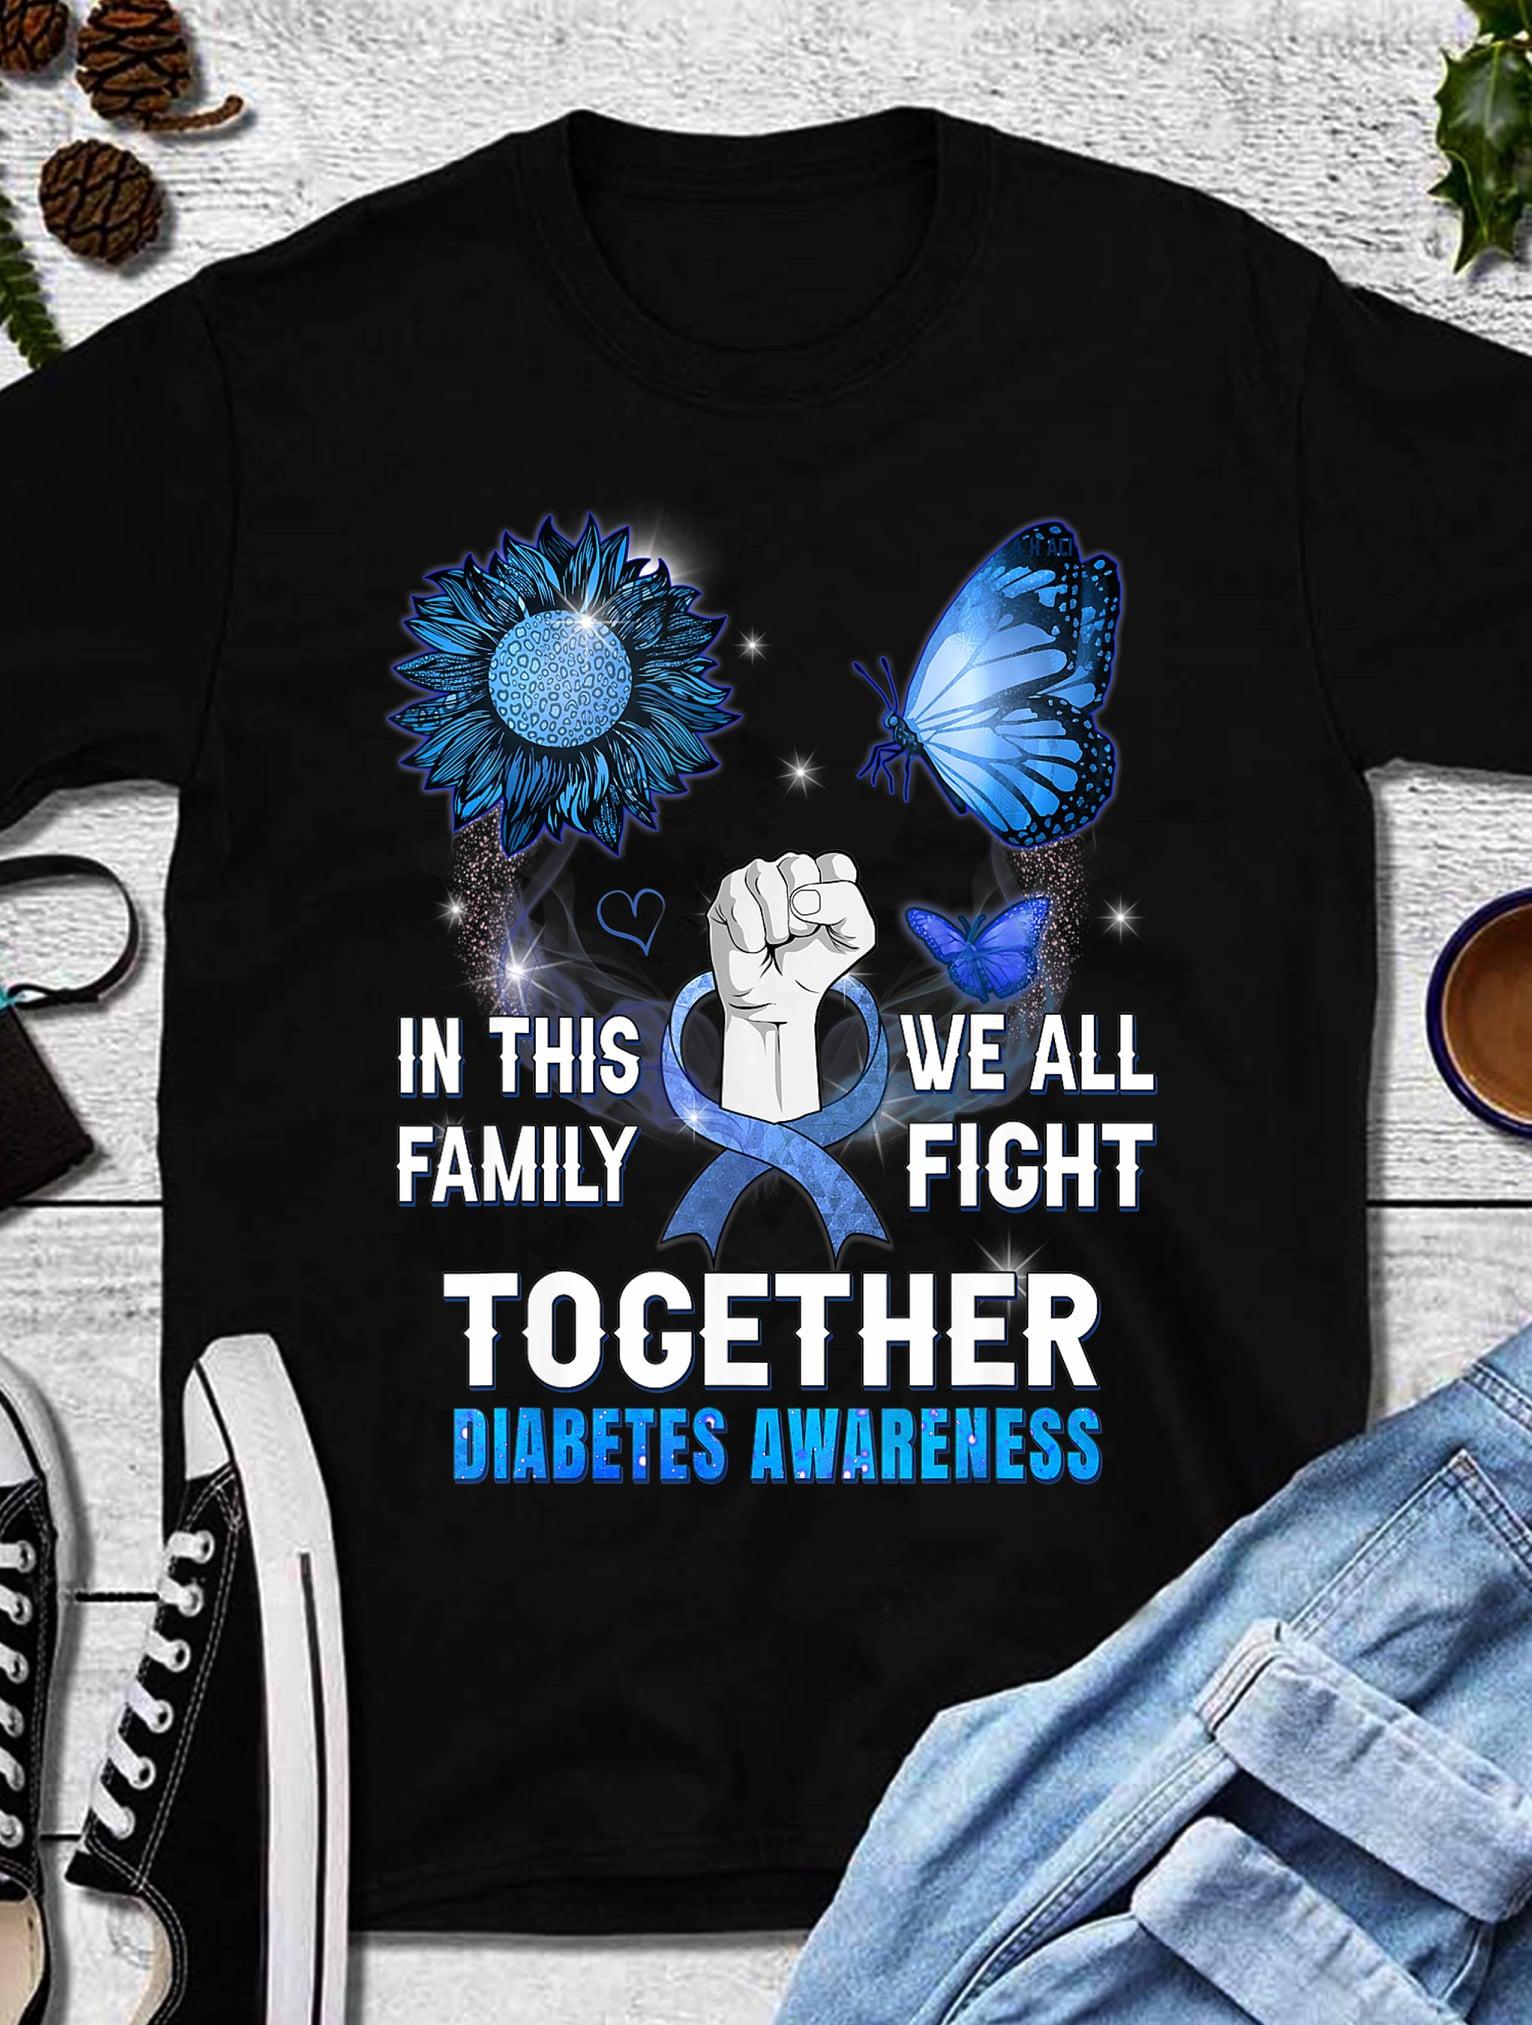 In this family we all fight together - Diabetes awareness, Diabetes family